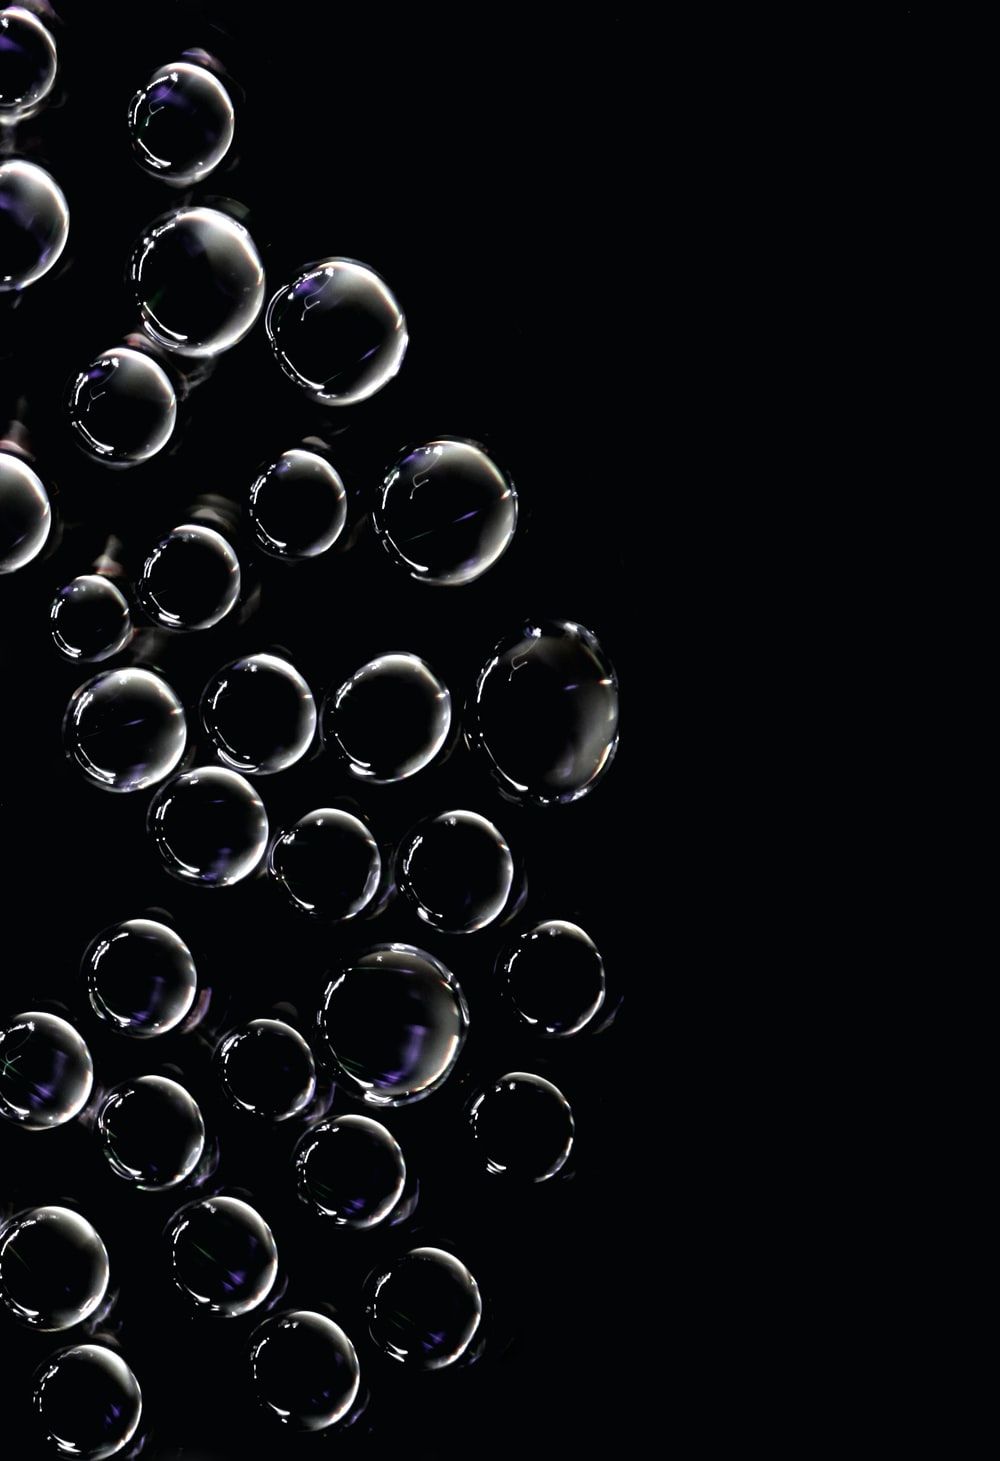 Bubble Picture. Download Free Image